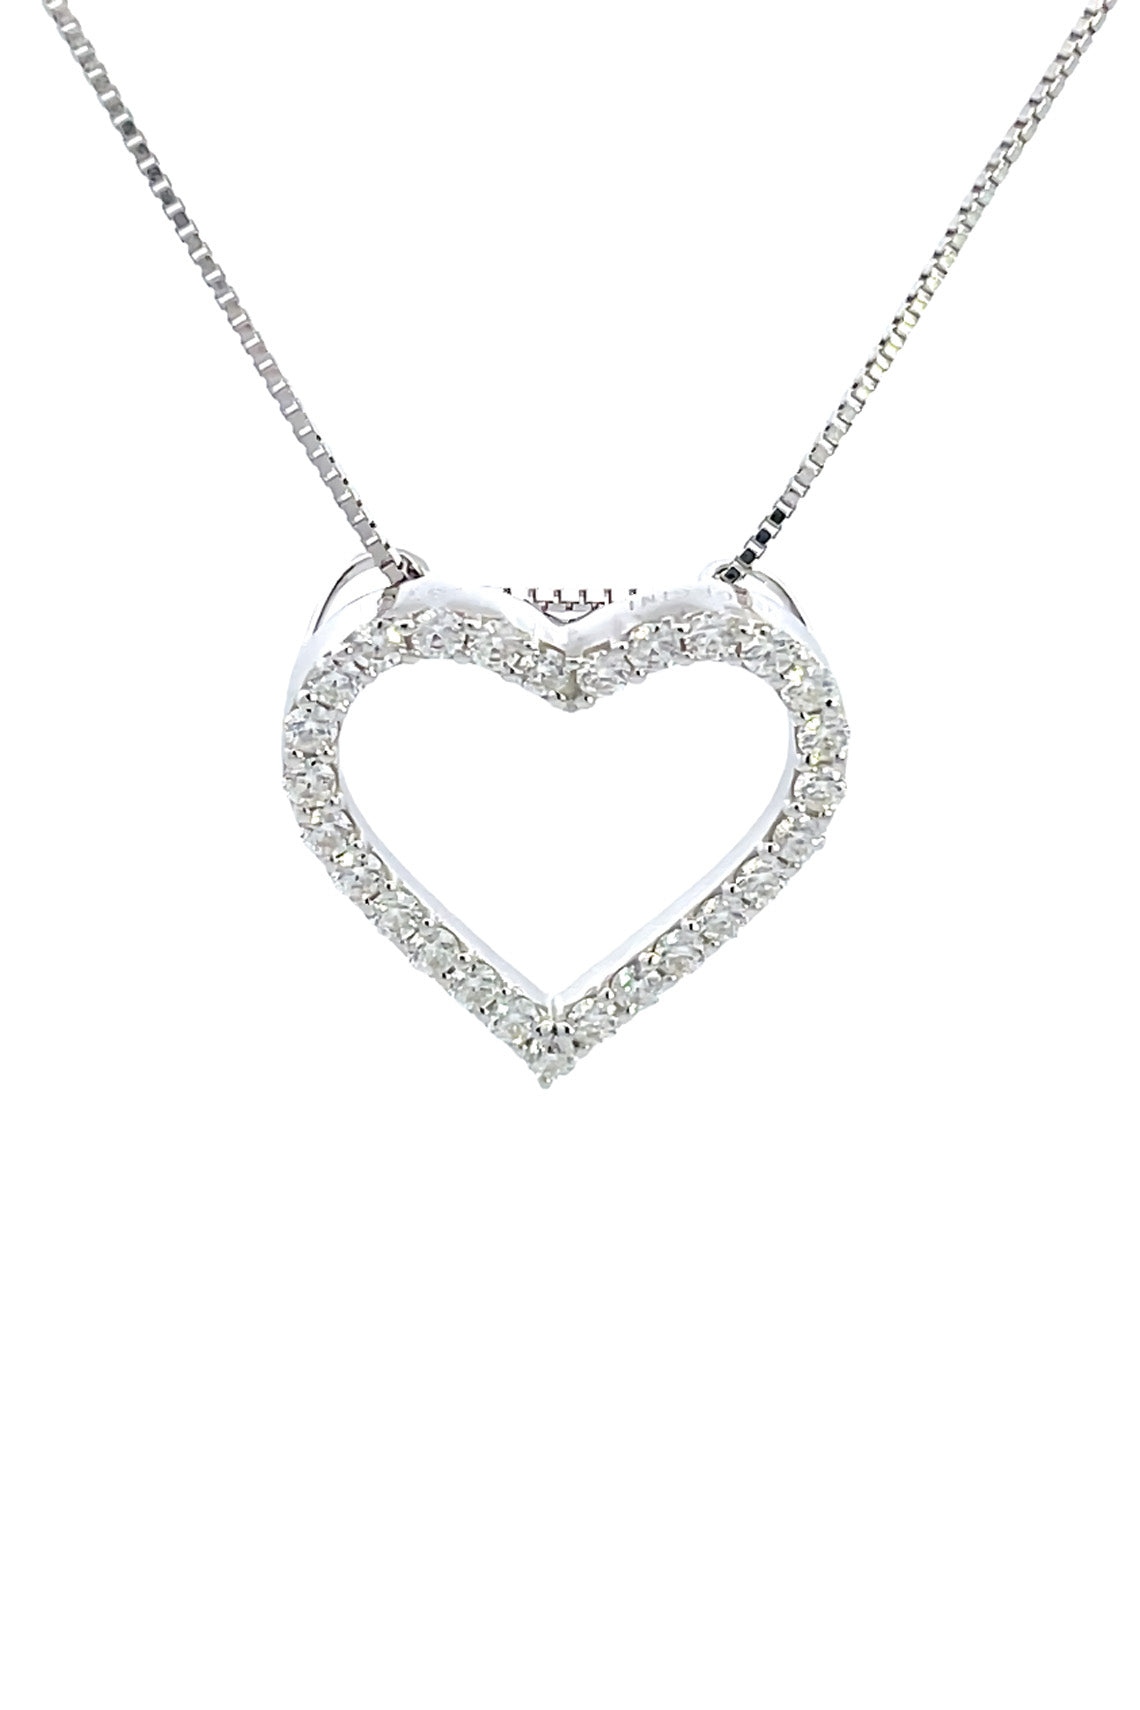 HEART 0.5TCW IN 9CT WHITE GOLD PENDANT